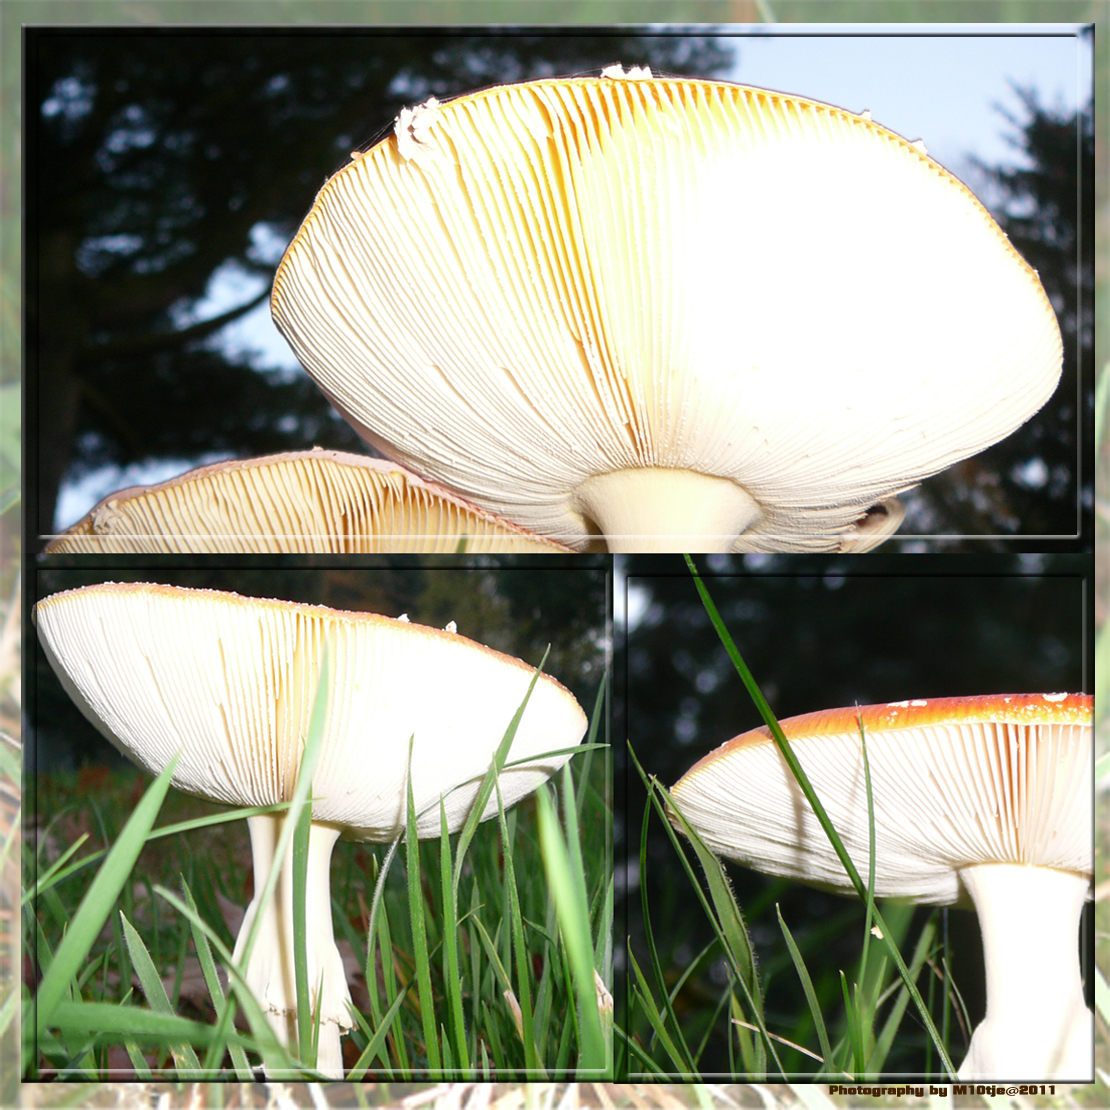 Stock images - Mushroom Collection 05